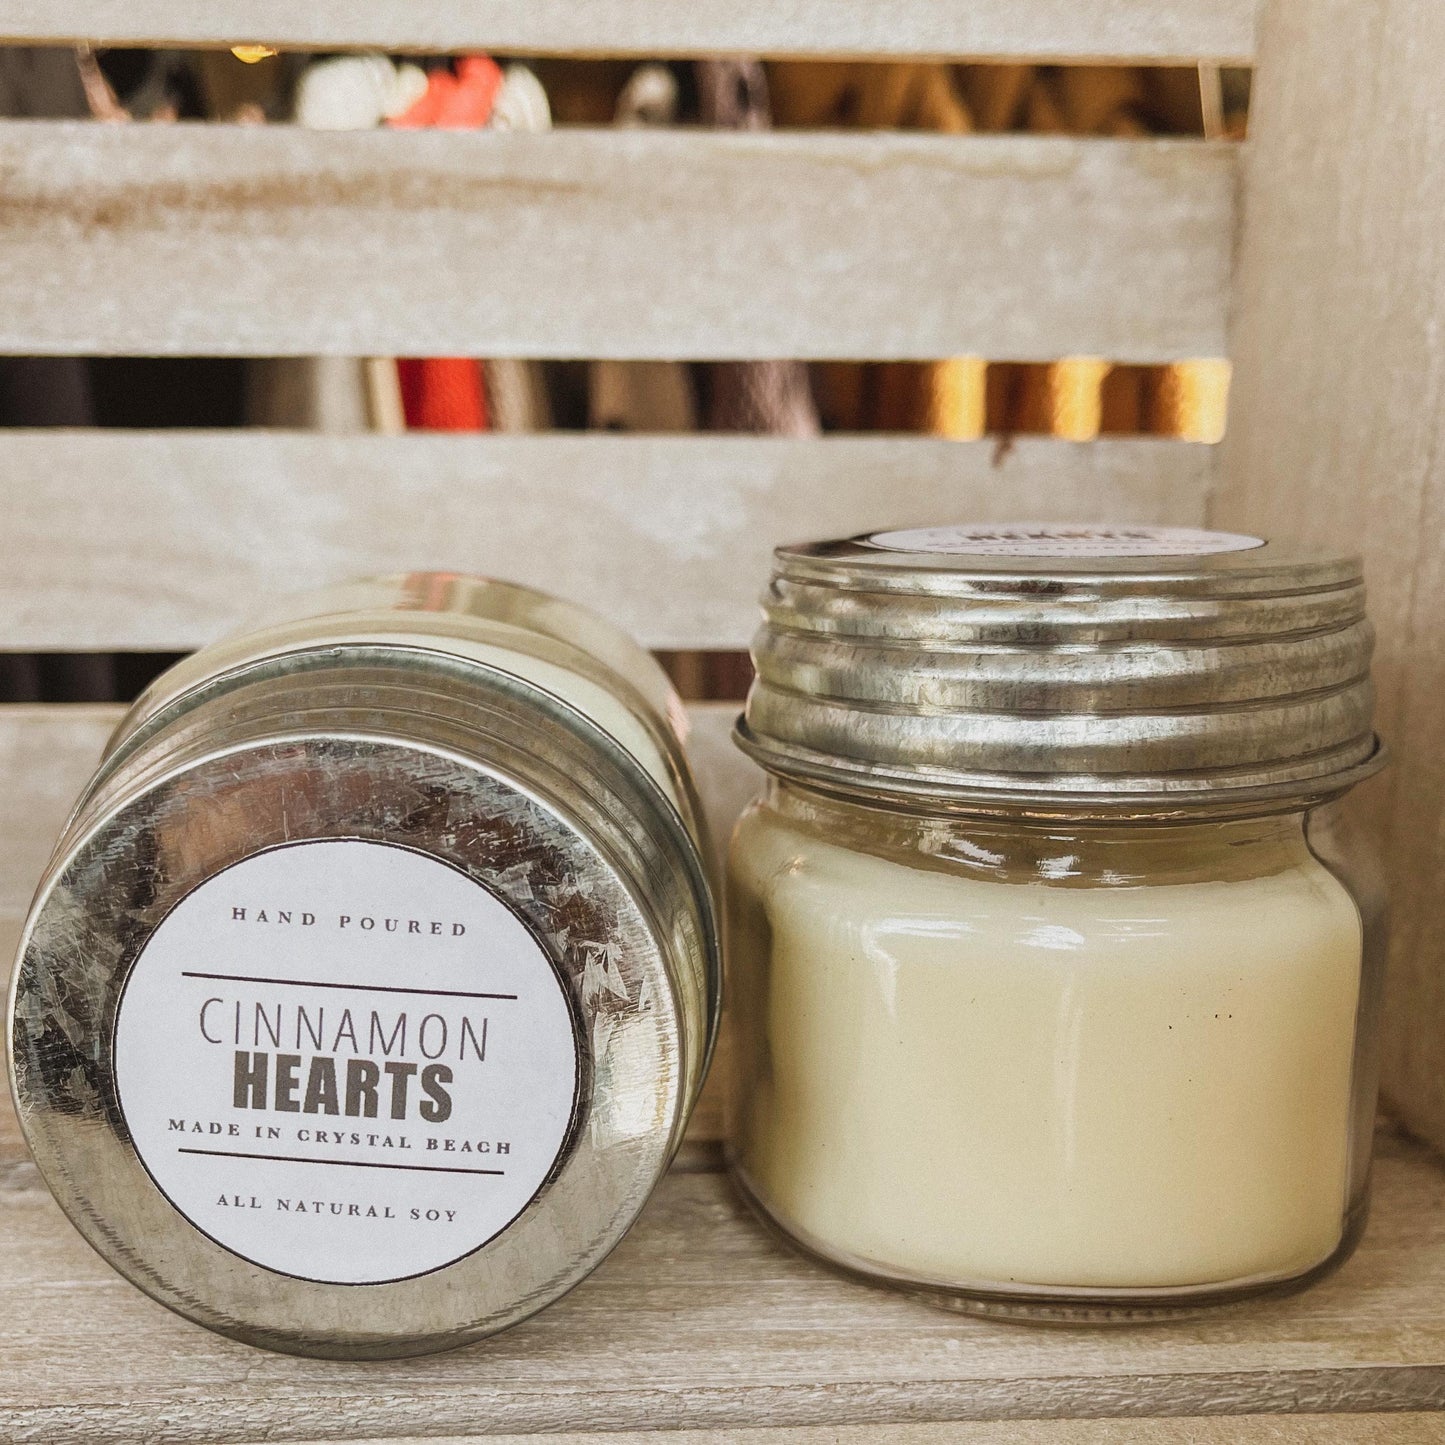 Cinnamon Hearts - Planks Canada's Hand Poured Soy Candles